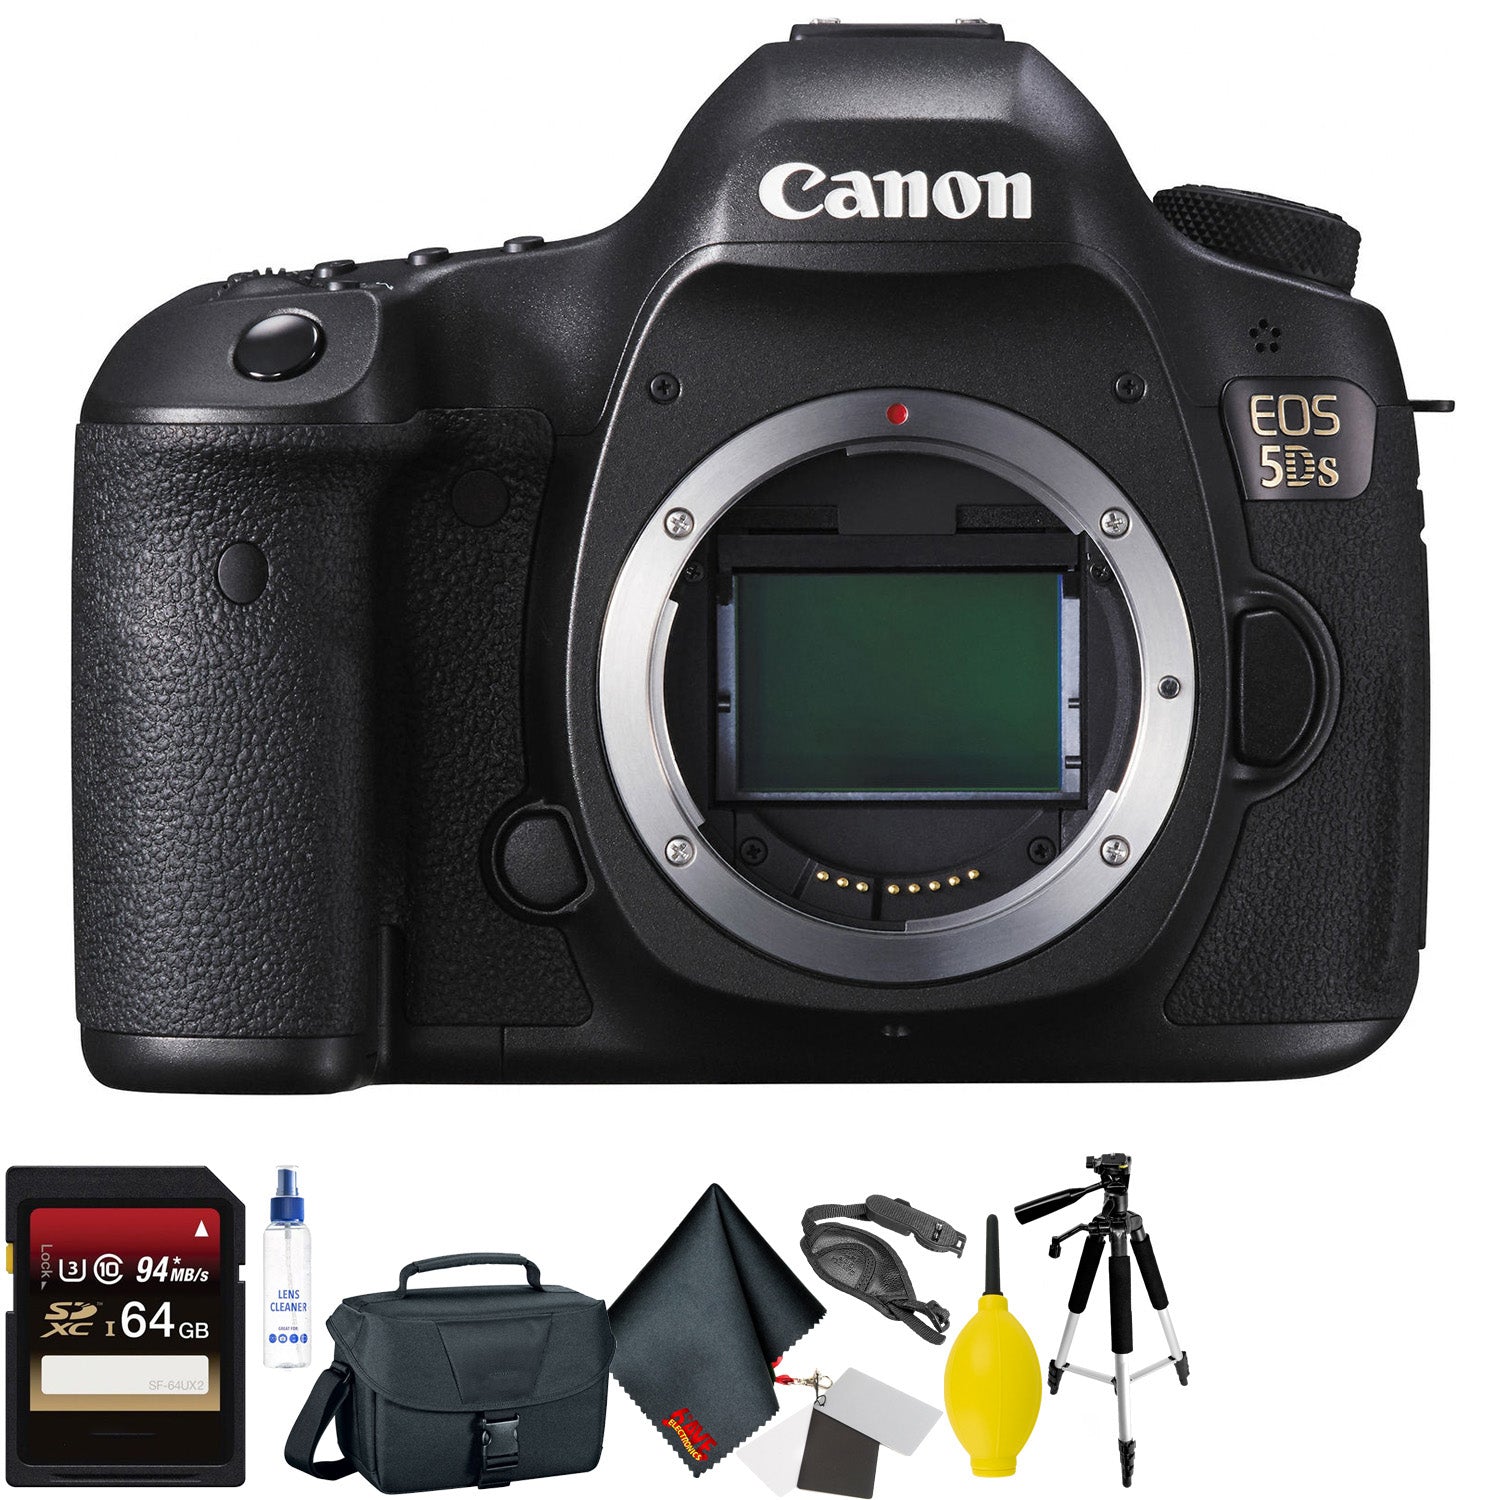 Canon EOS 5DS DSLR Camera (Body Only) + 64GB Memory Card + Mega Accessory Kit + 2 Year Accidental Warranty